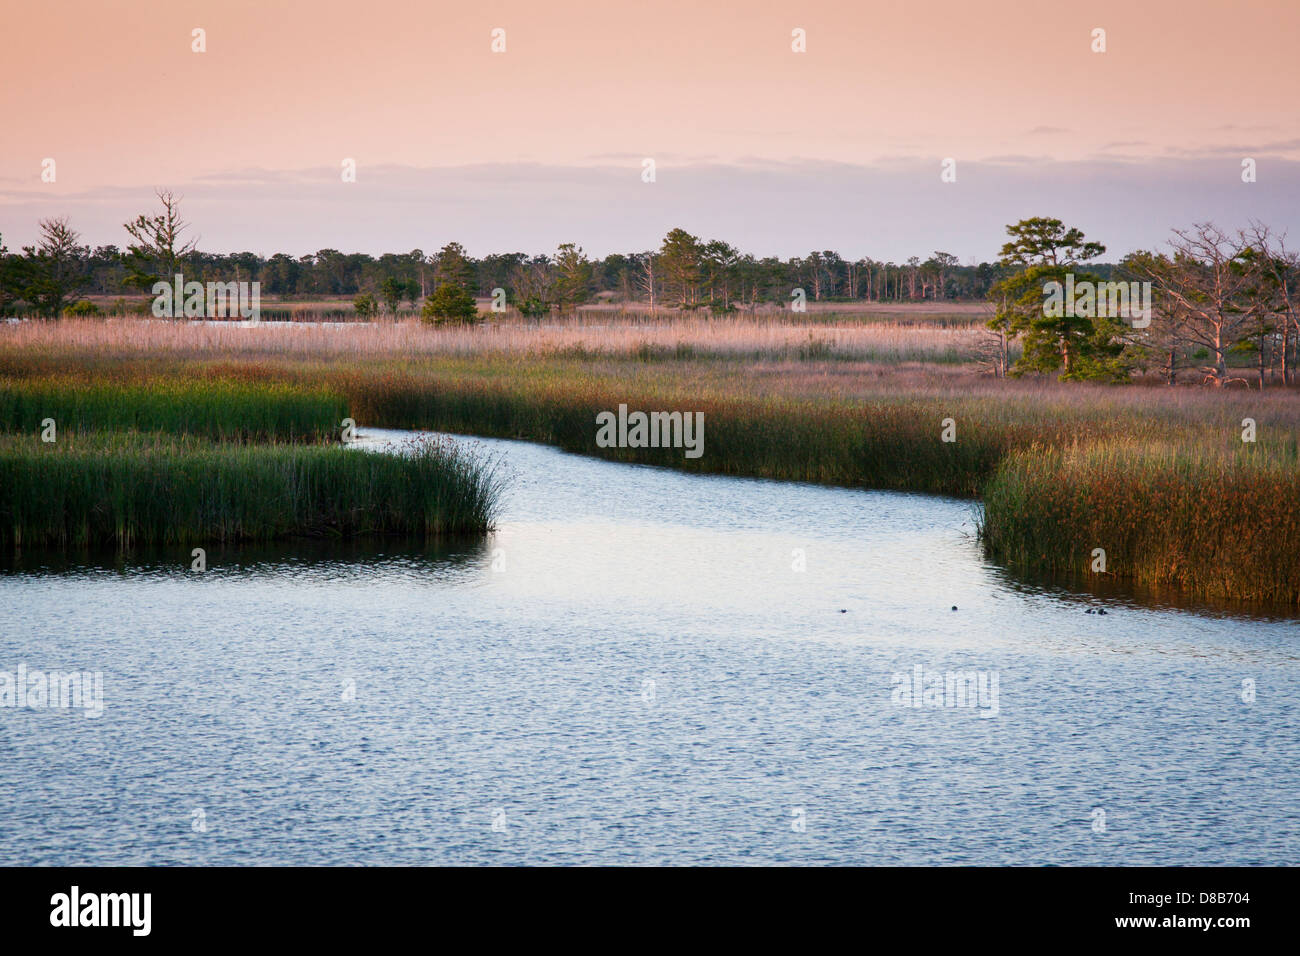 The marsh grasses glow in the last light of day along the Apalachicola River in Apalachicola, Florida, USA Stock Photo